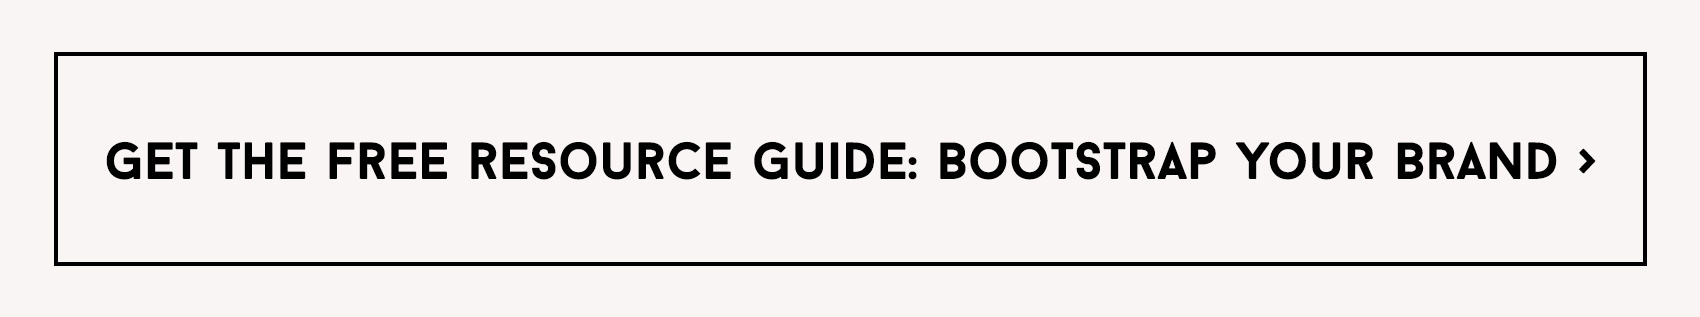 get the free resource guide: bootstrap your brand